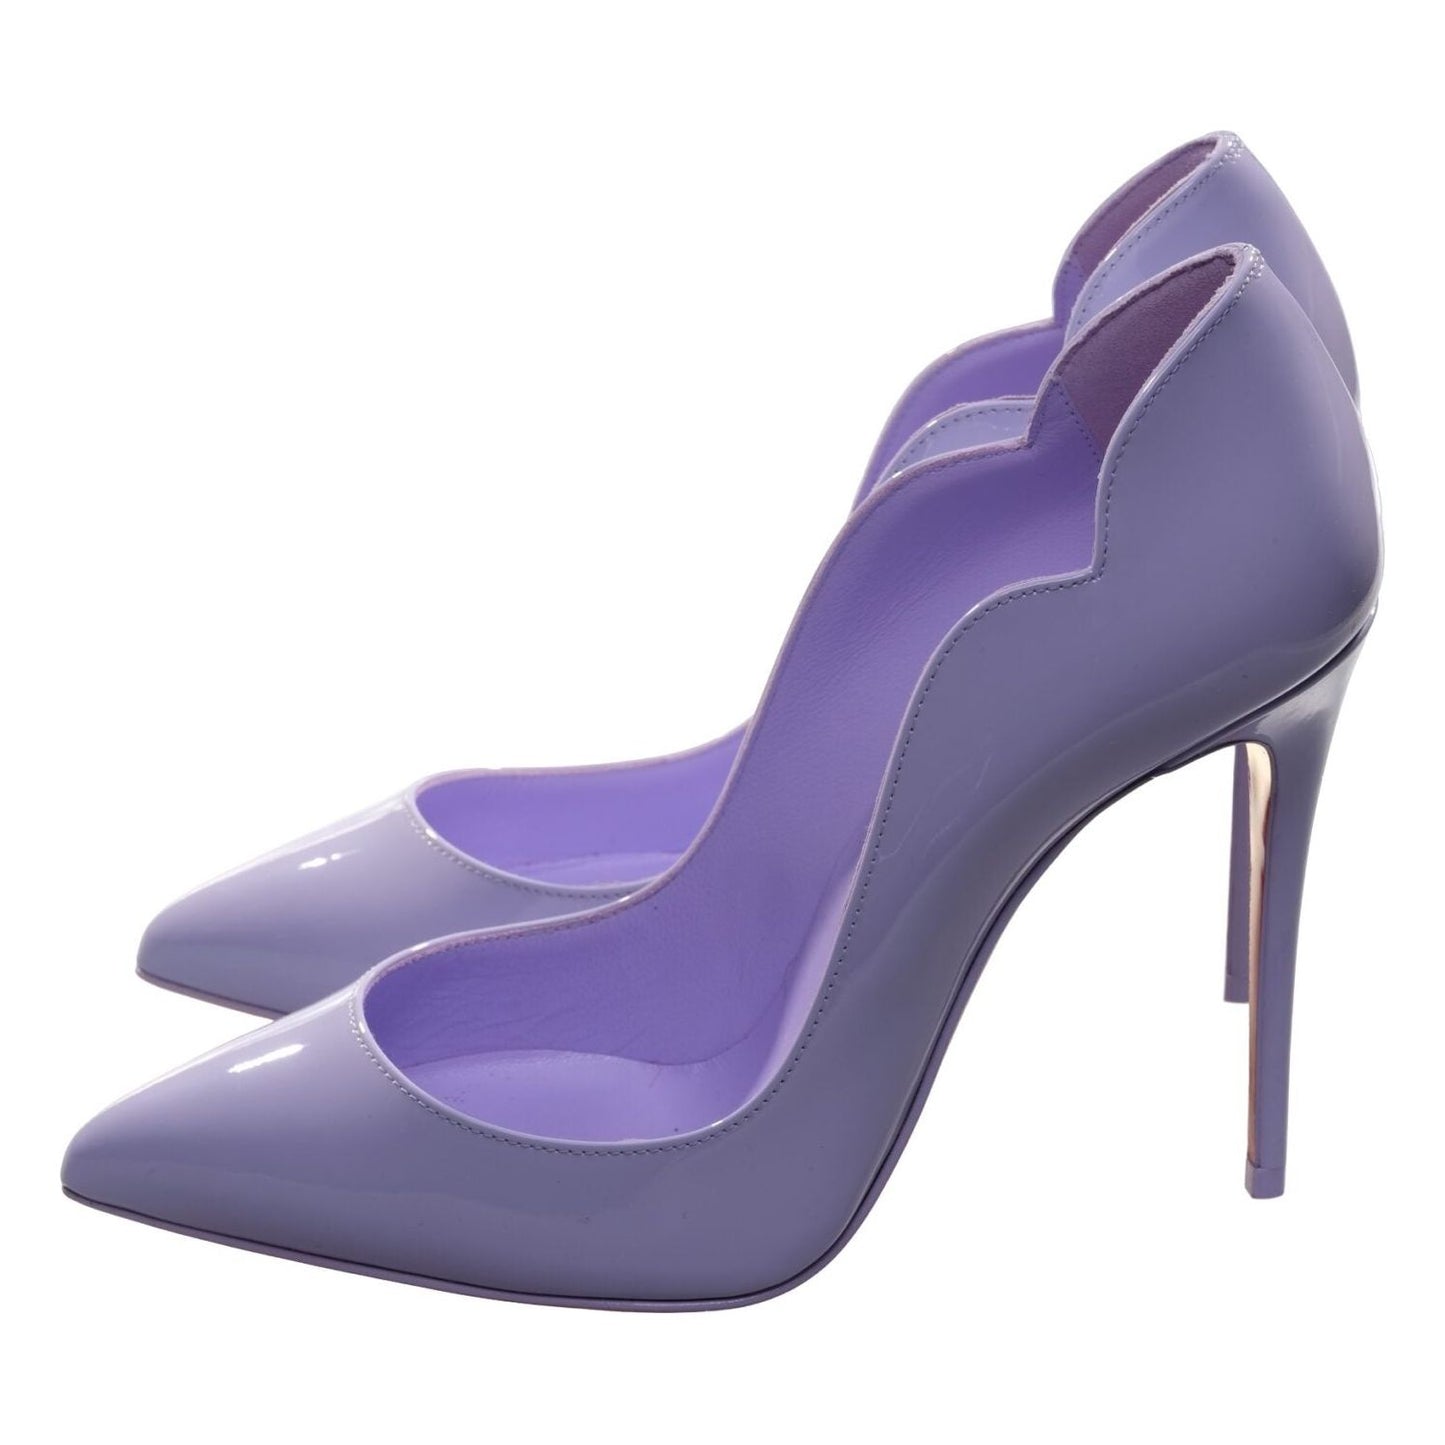 Hot Chick 100 Lilac Patent Leather High Heel Pump